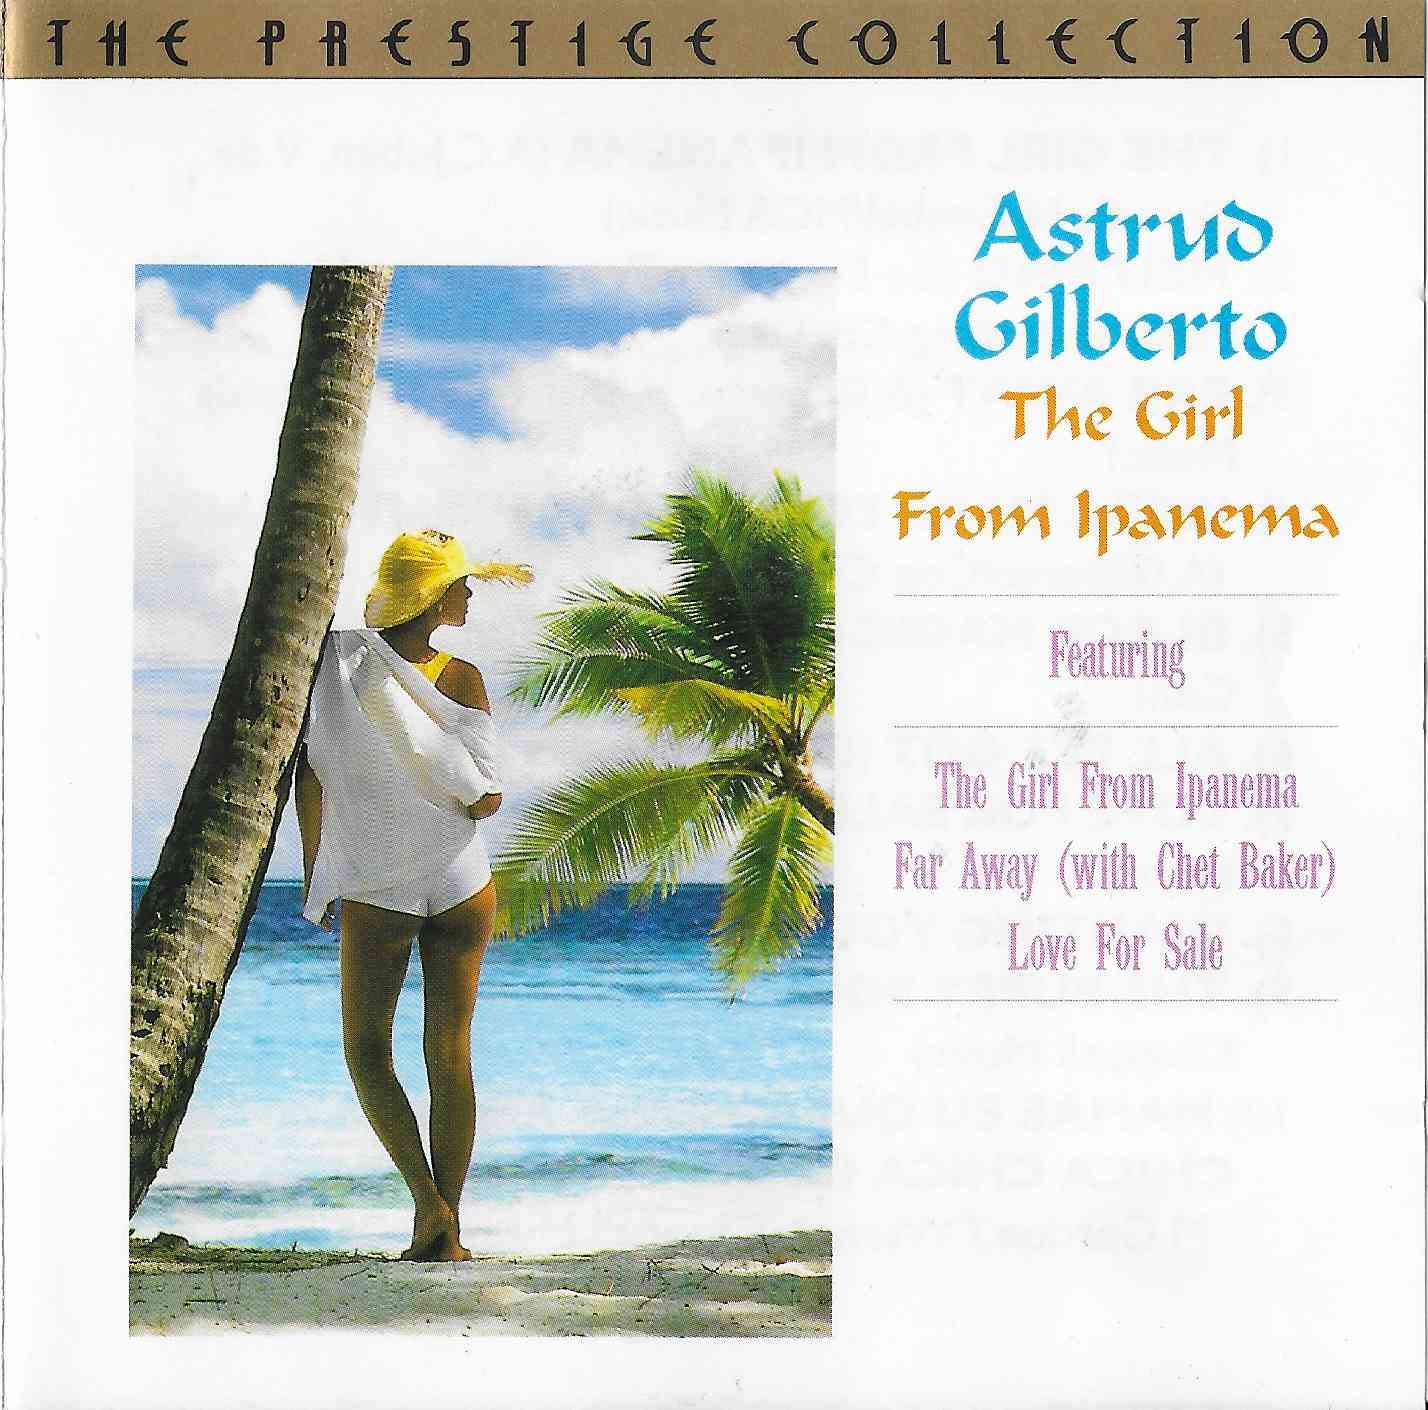 Picture of The girl from Ipanema by artist Astrud Gilberto from the BBC cds - Records and Tapes library